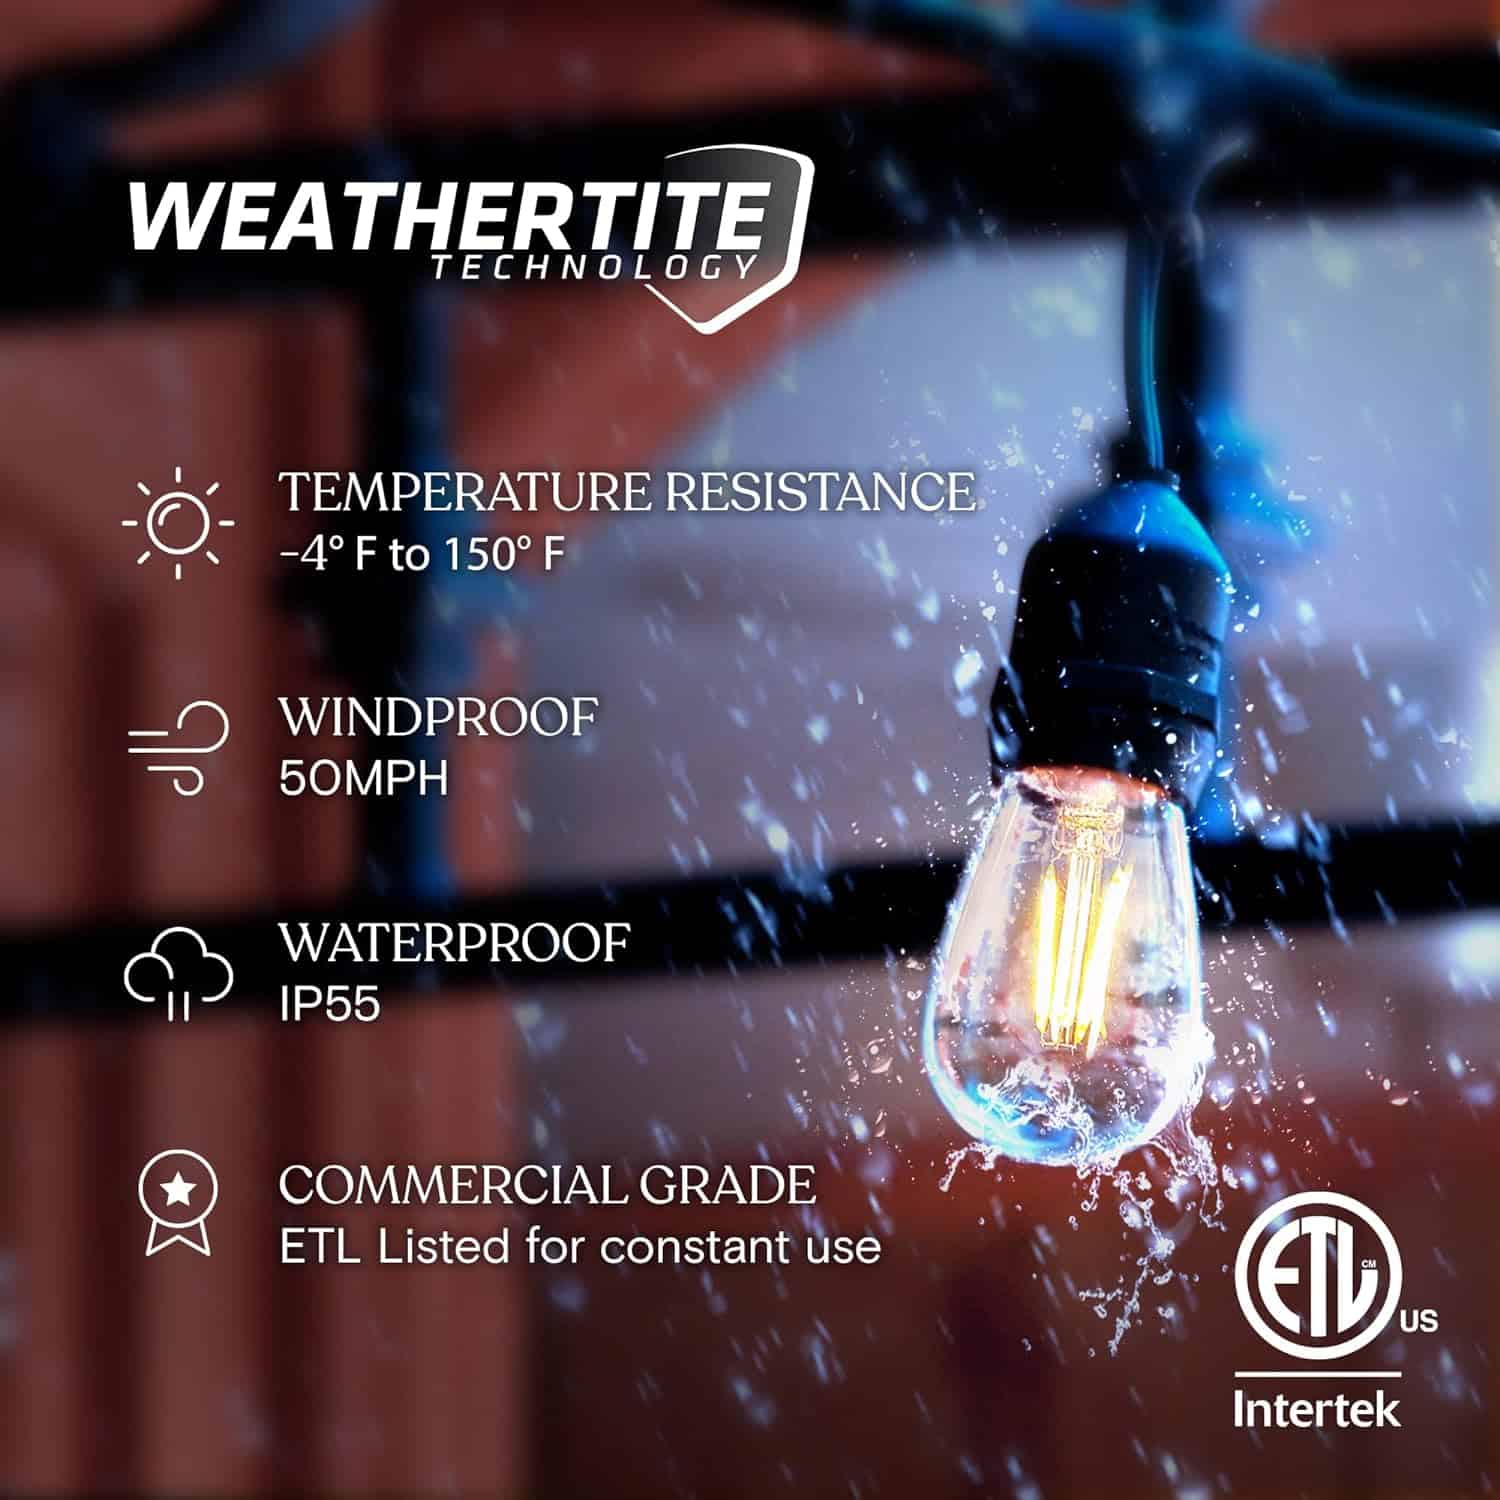 Brightech Ambience Pro - Waterproof LED Outdoor String Lights - Hanging, Dimmable 2W Vintage Edison Bulbs - 48 Ft Commercial Grade Patio Lights Create Cafe Ambience In Your Backyard